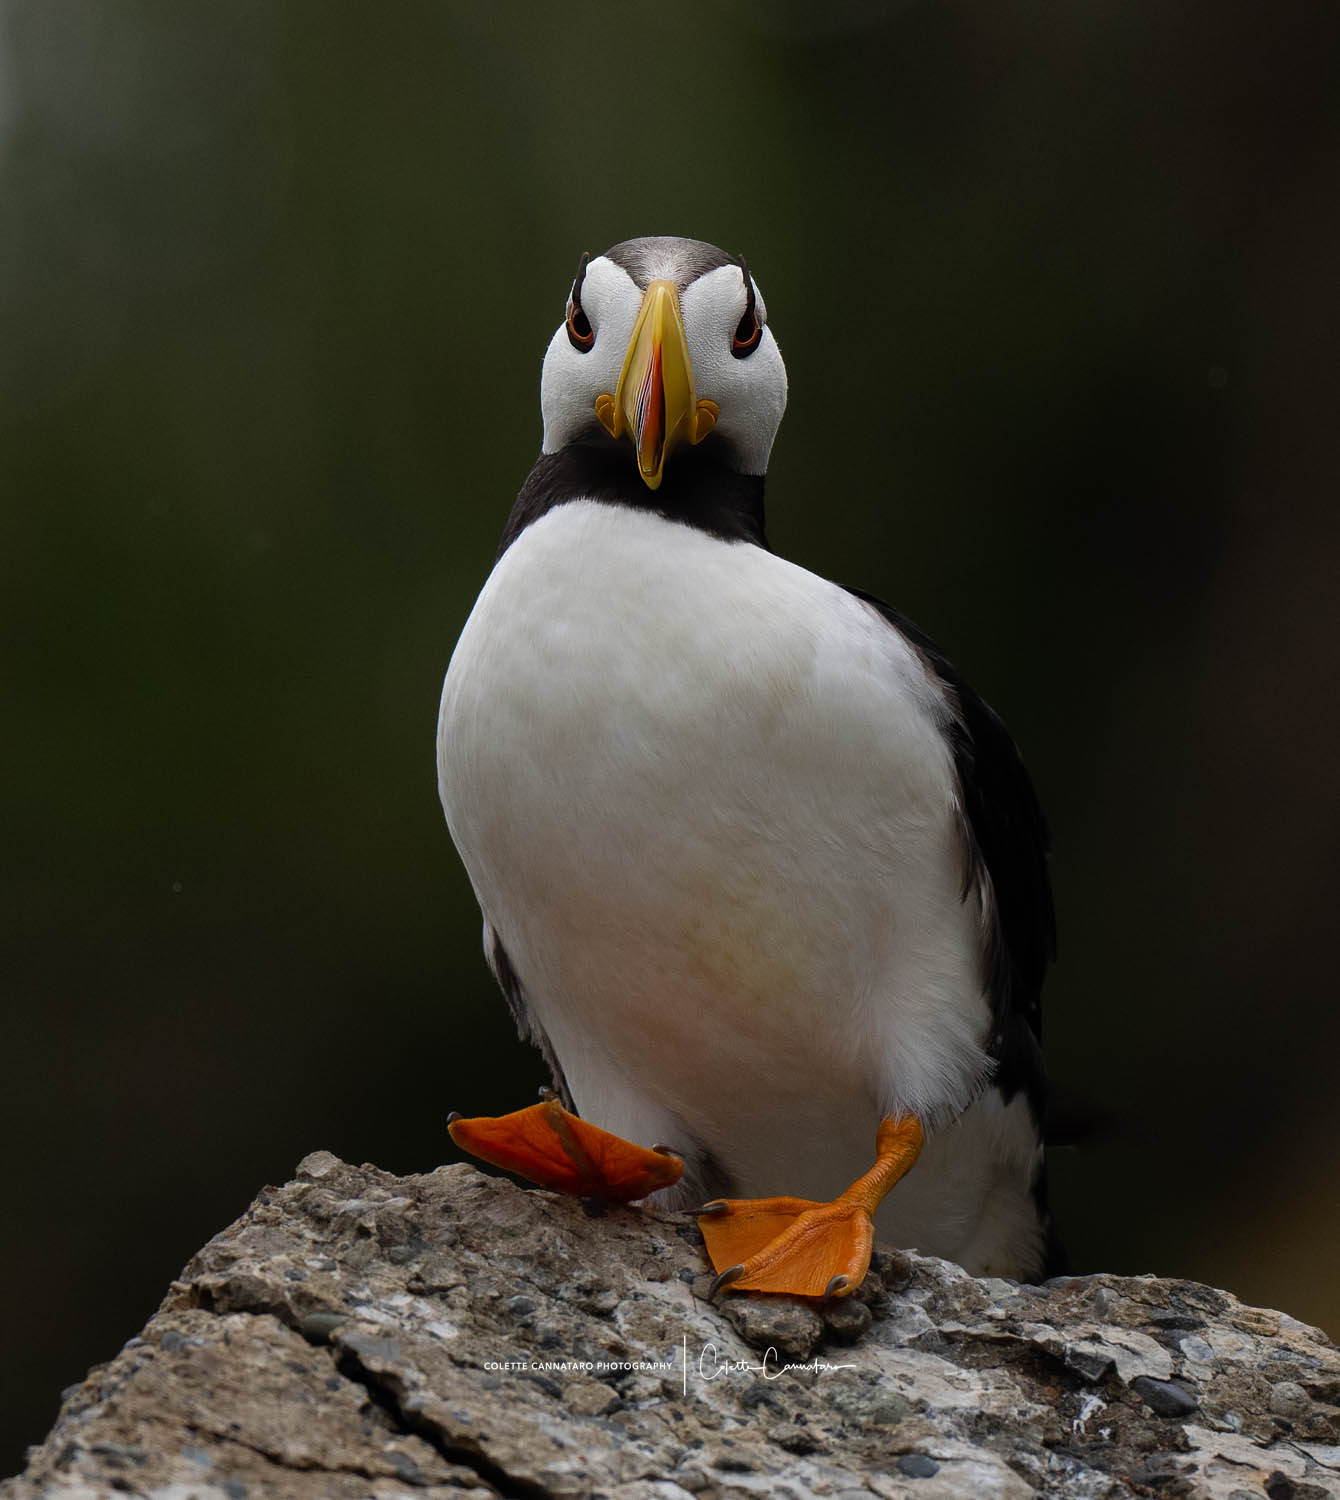 The Atlantic Puffin spends nine months of the year floating in the ocean, returning to land in April and staying through the...